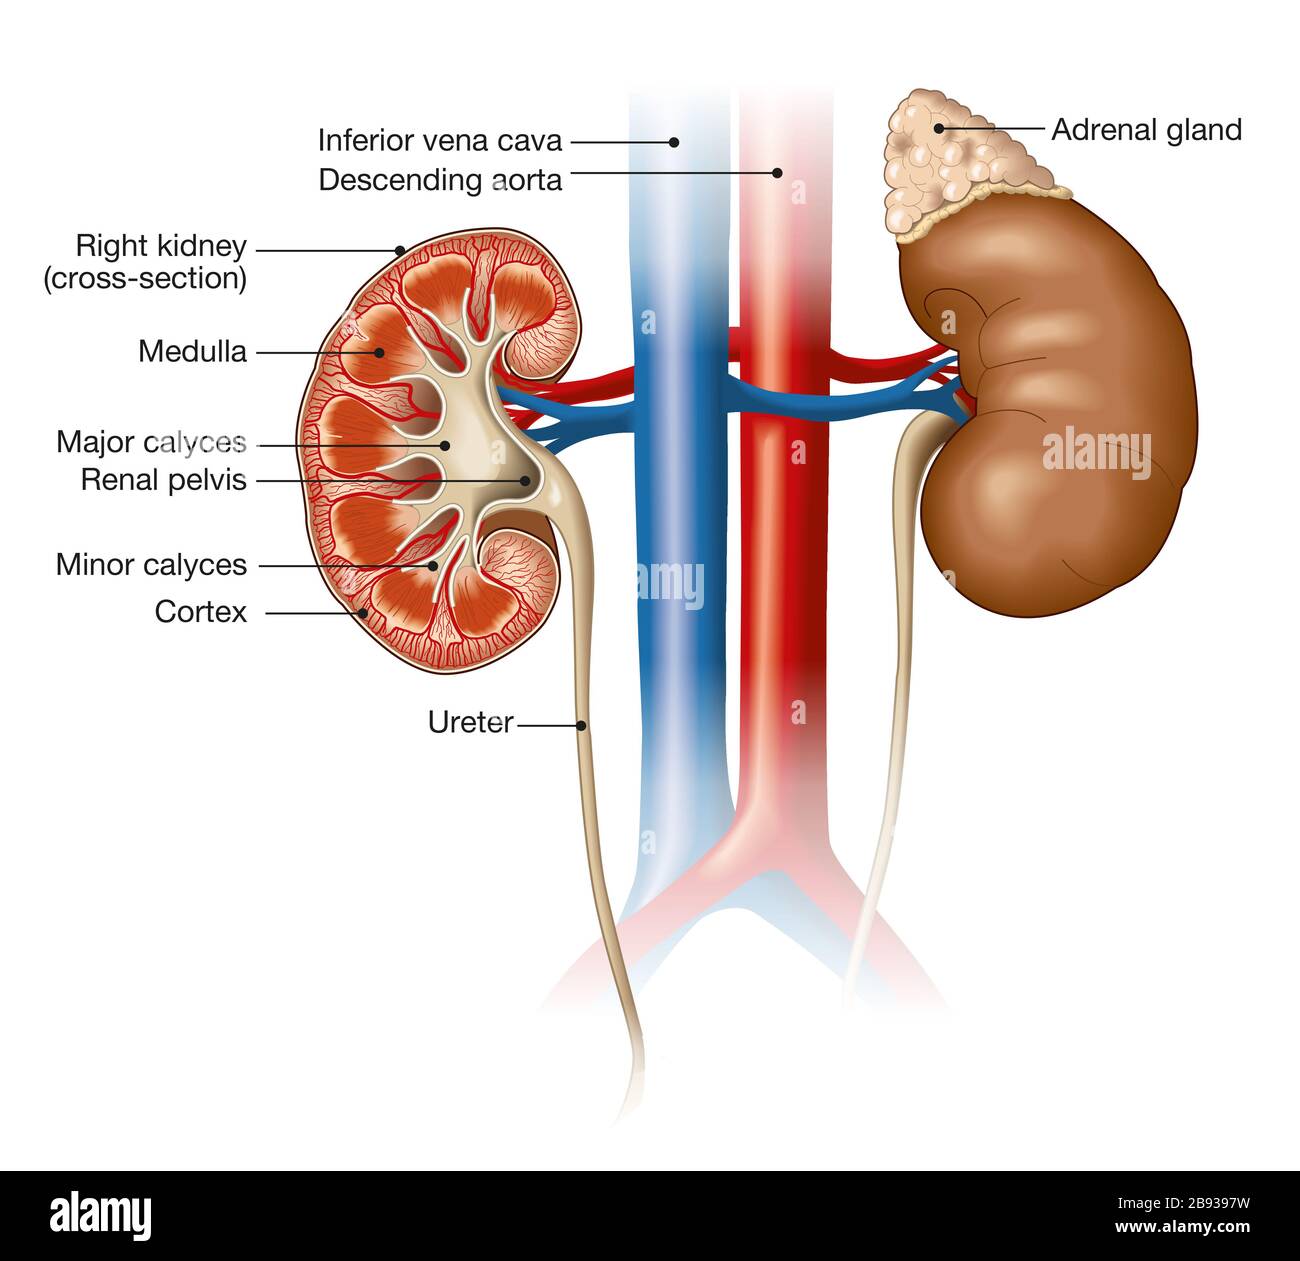 Medically illustration showing cross-section of a kidney with with inferior vena cava and descending aorta Stock Photo